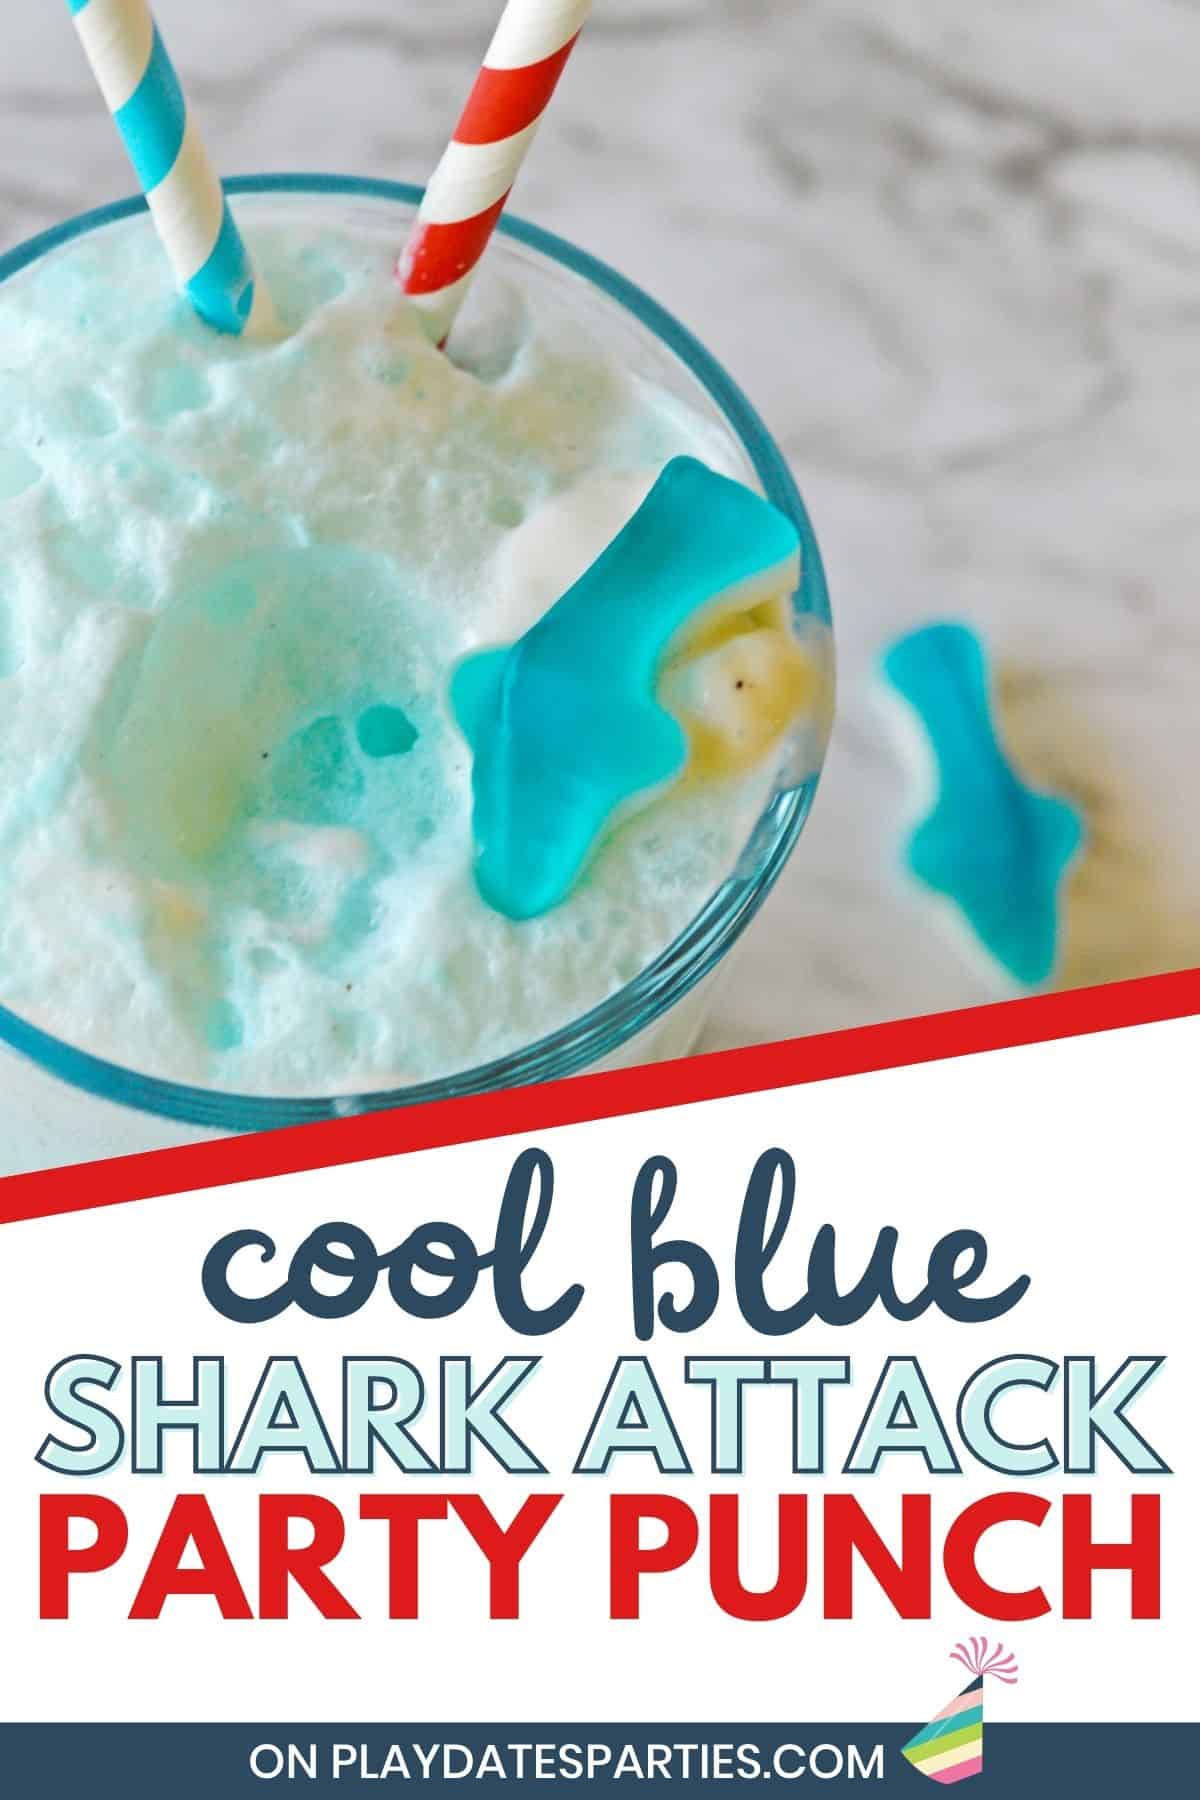 Close up of a foamy head of punch with text overlay cool blue shark attack party punch.